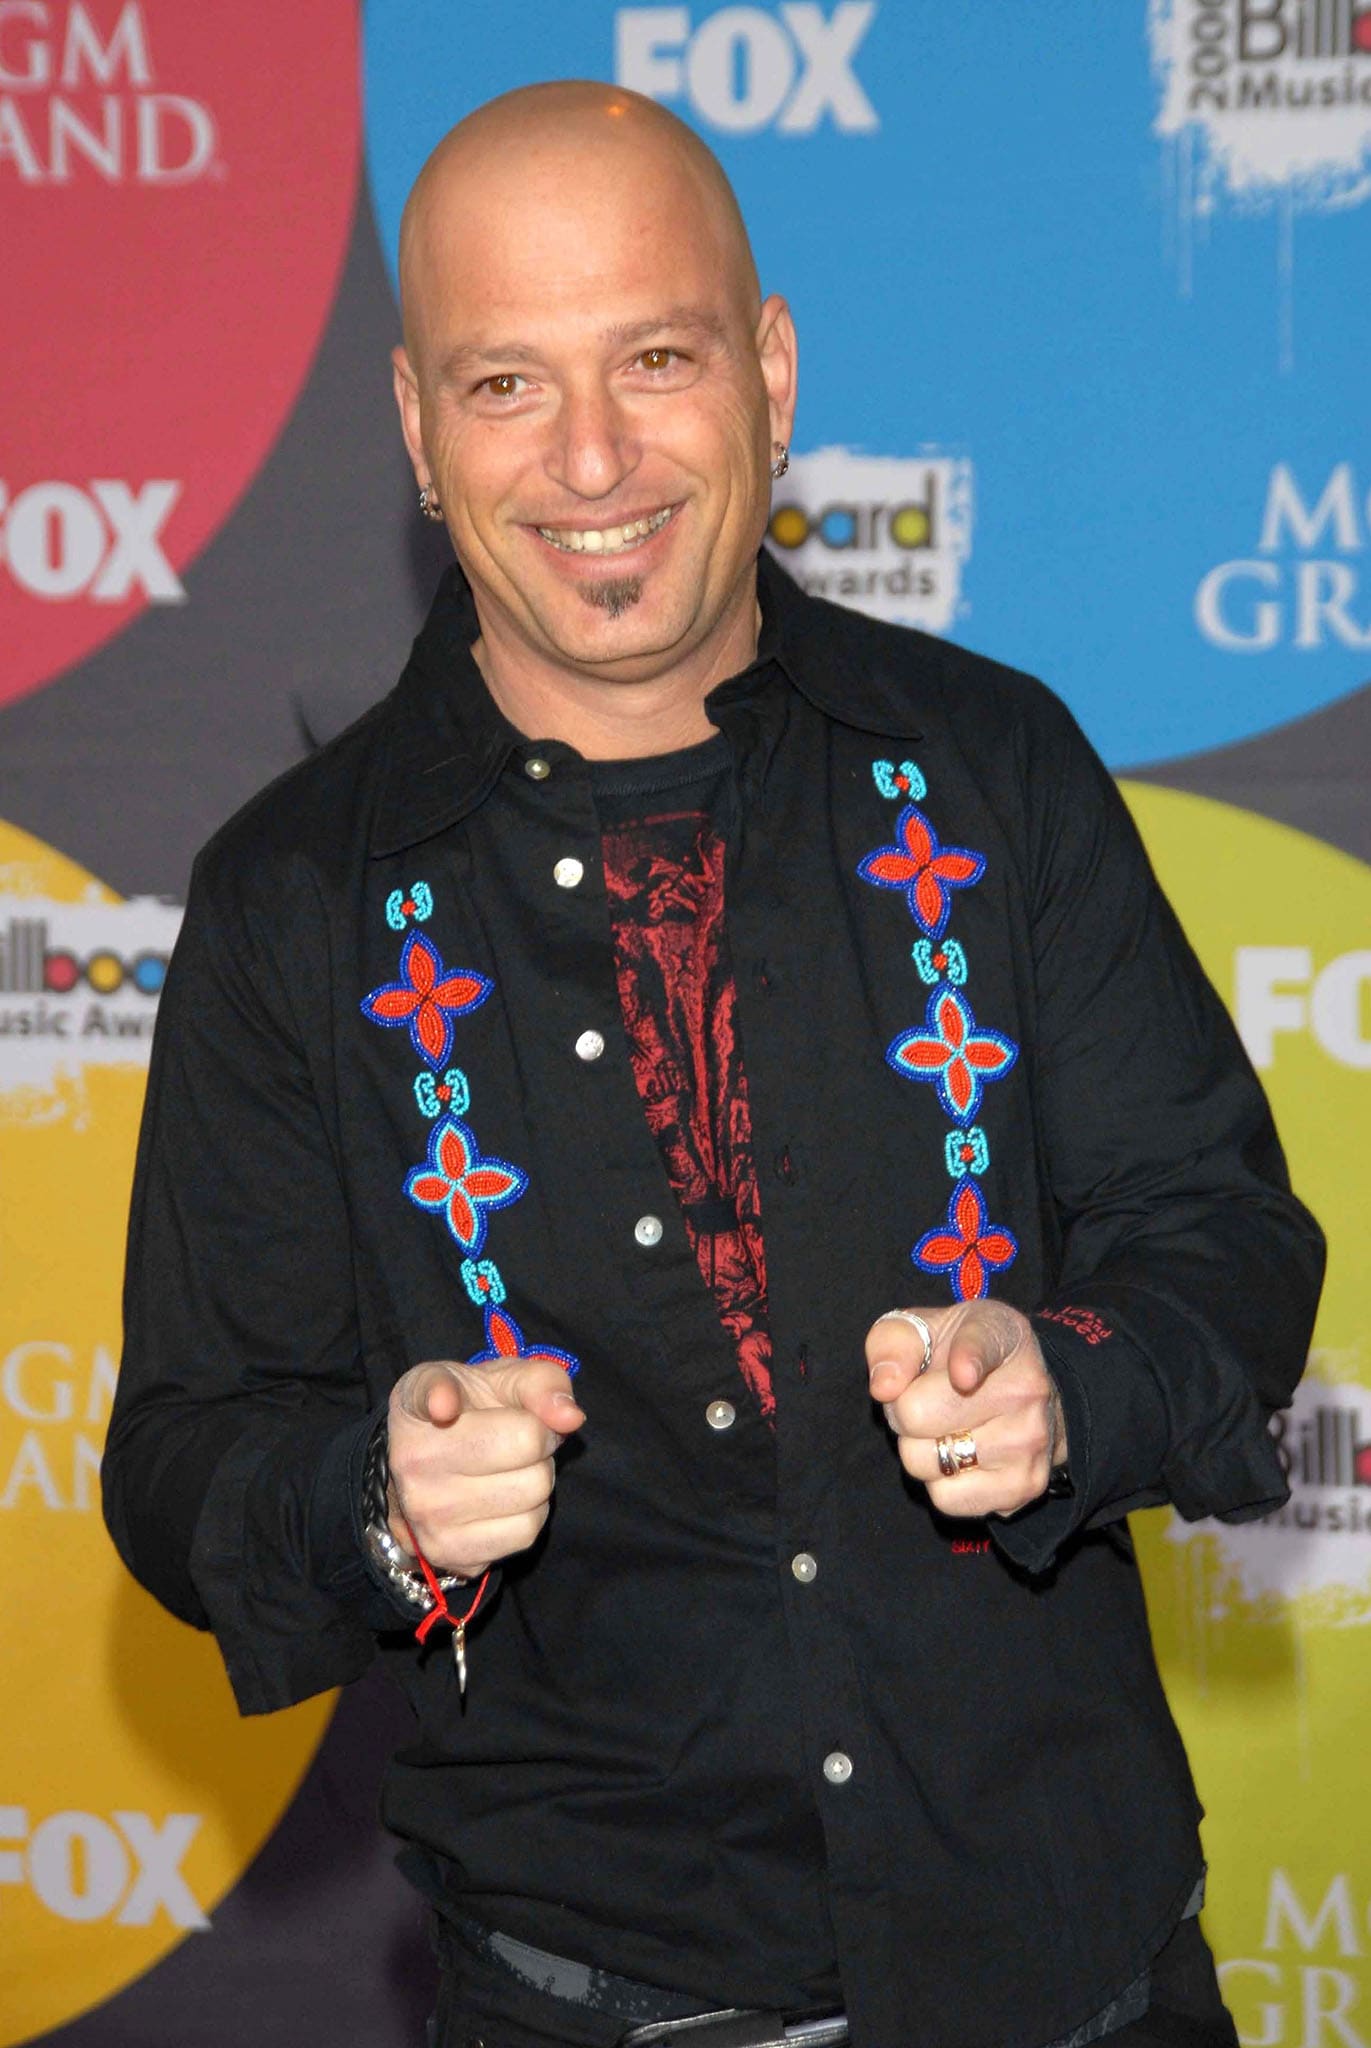 The pandemic has been an especially difficult time for Howie Mandel since he suffers from OCD